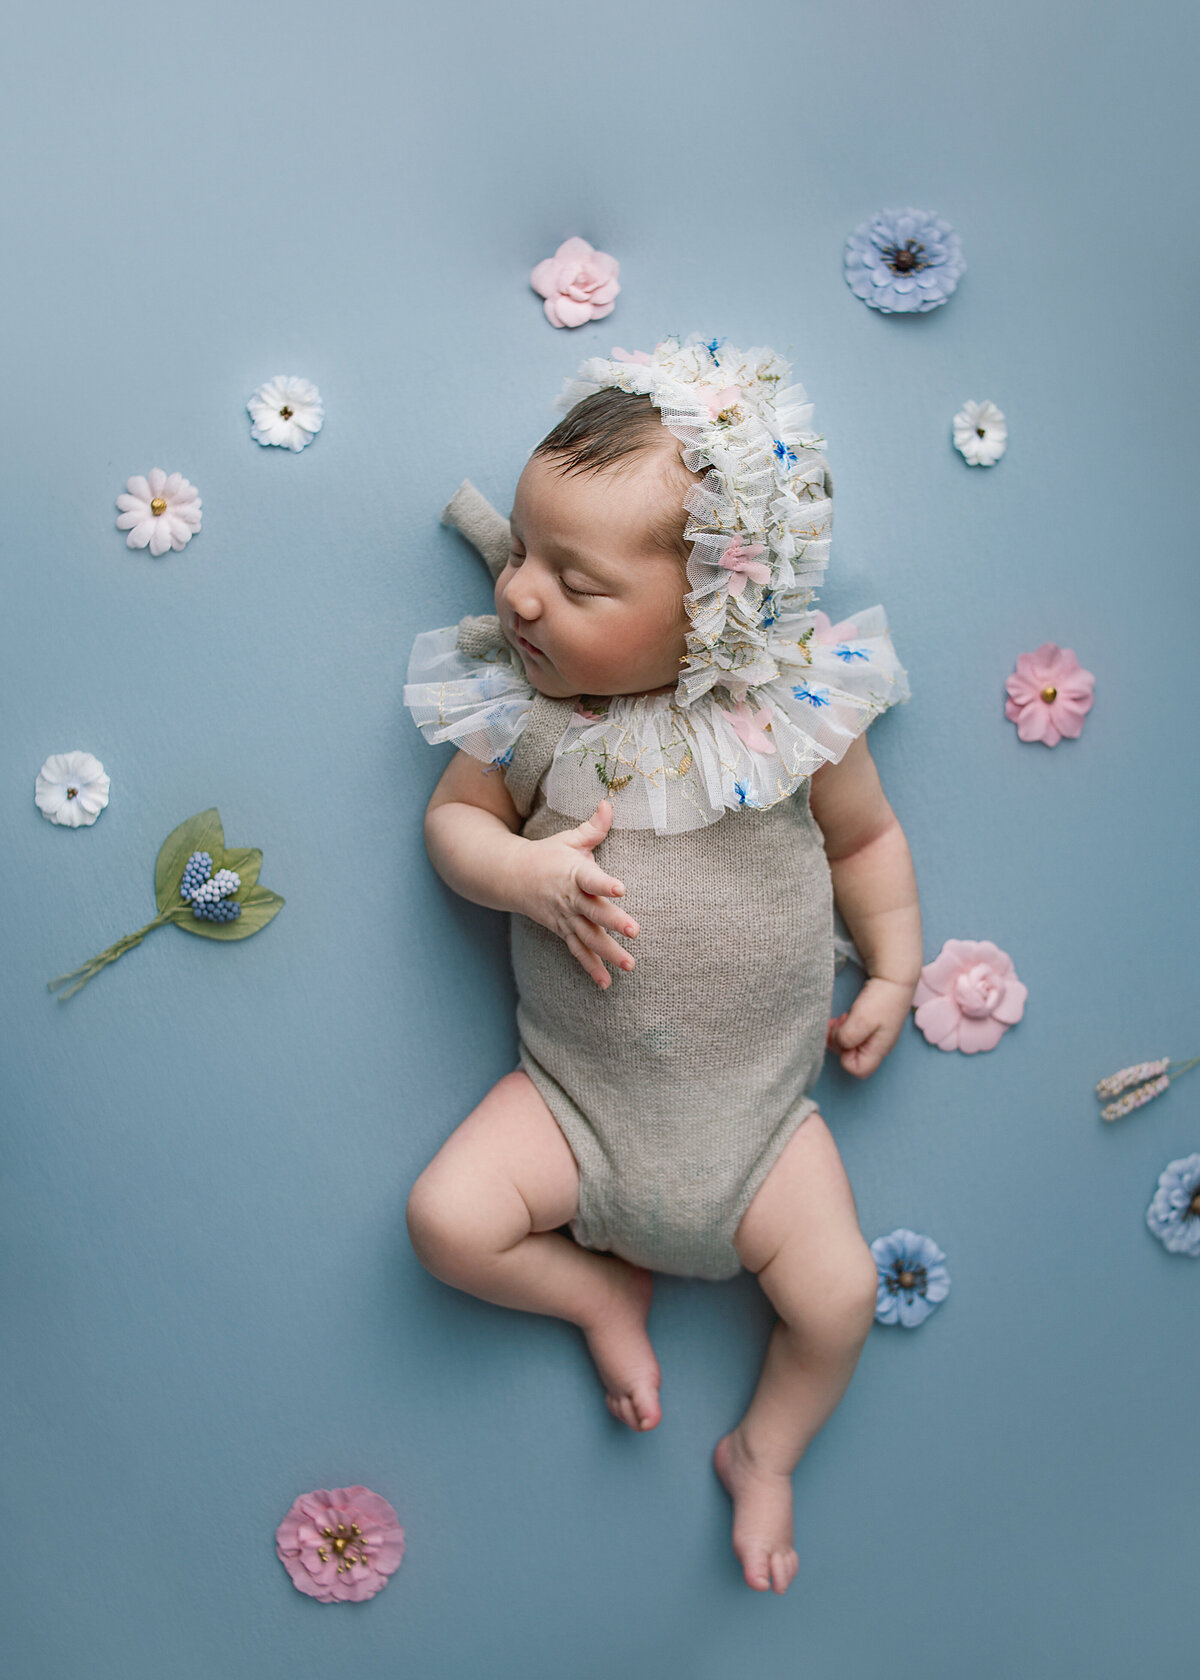 Newborn baby girl wearing grey romper laying on blue fabric during newborn session photoshoot in Franklin Tennessee photography studio